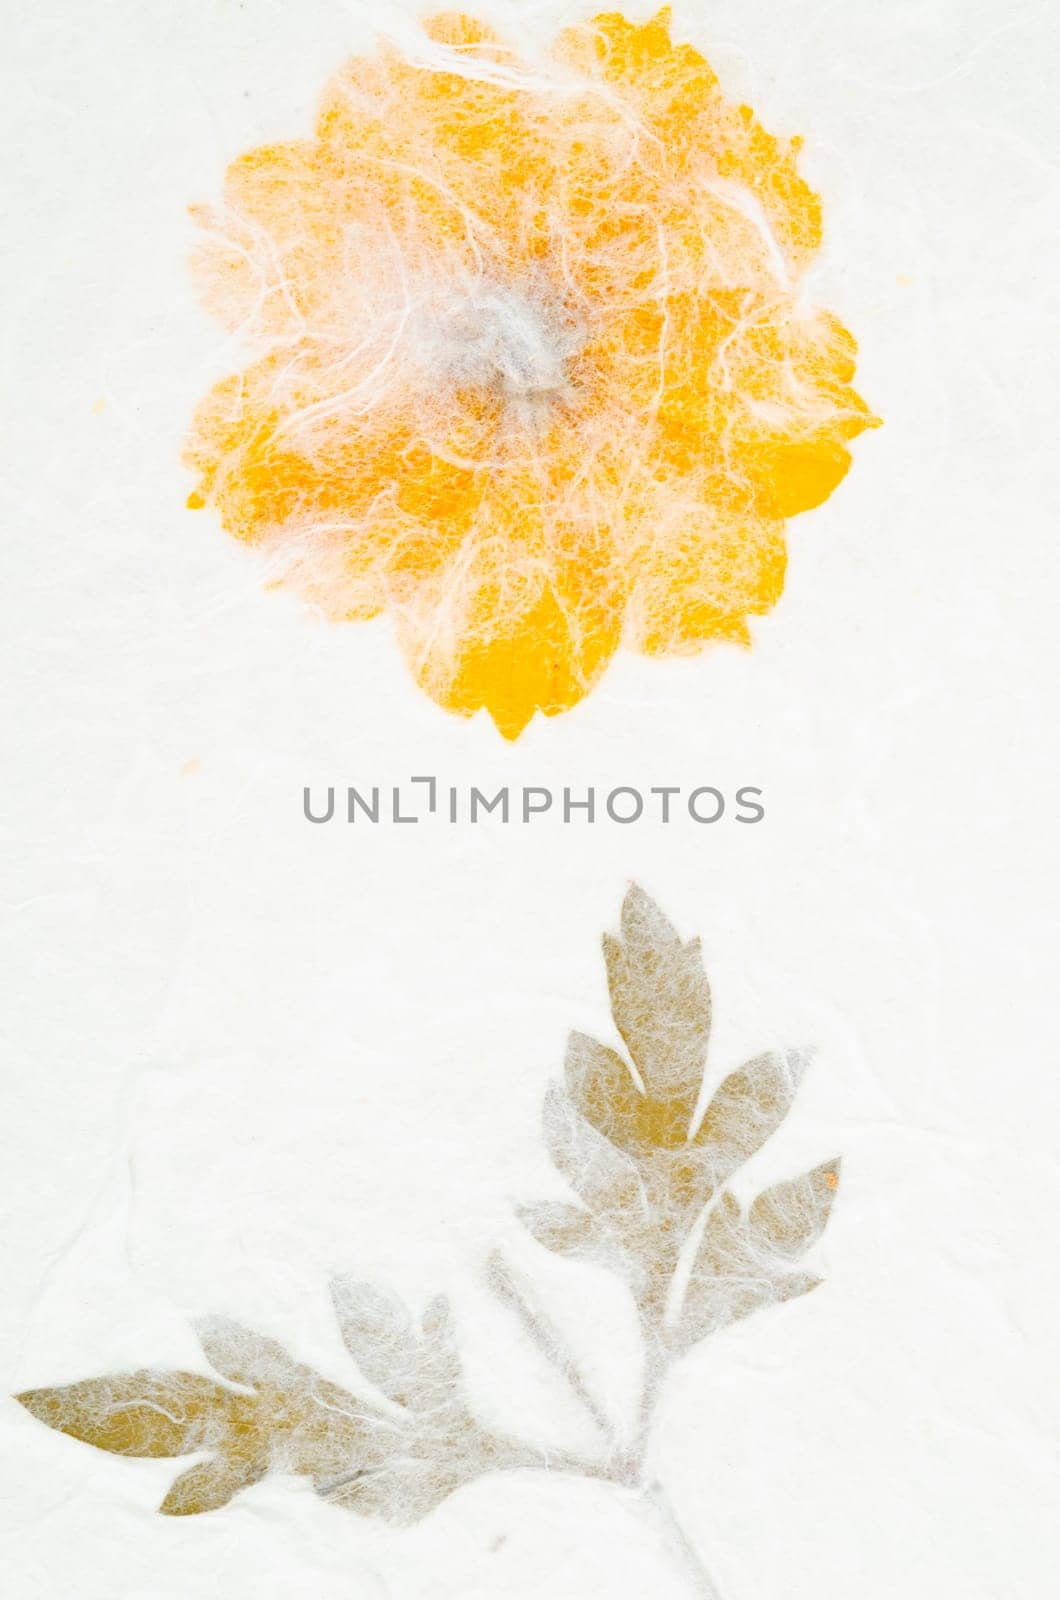 White mulberry paper with yellow flower texture background.